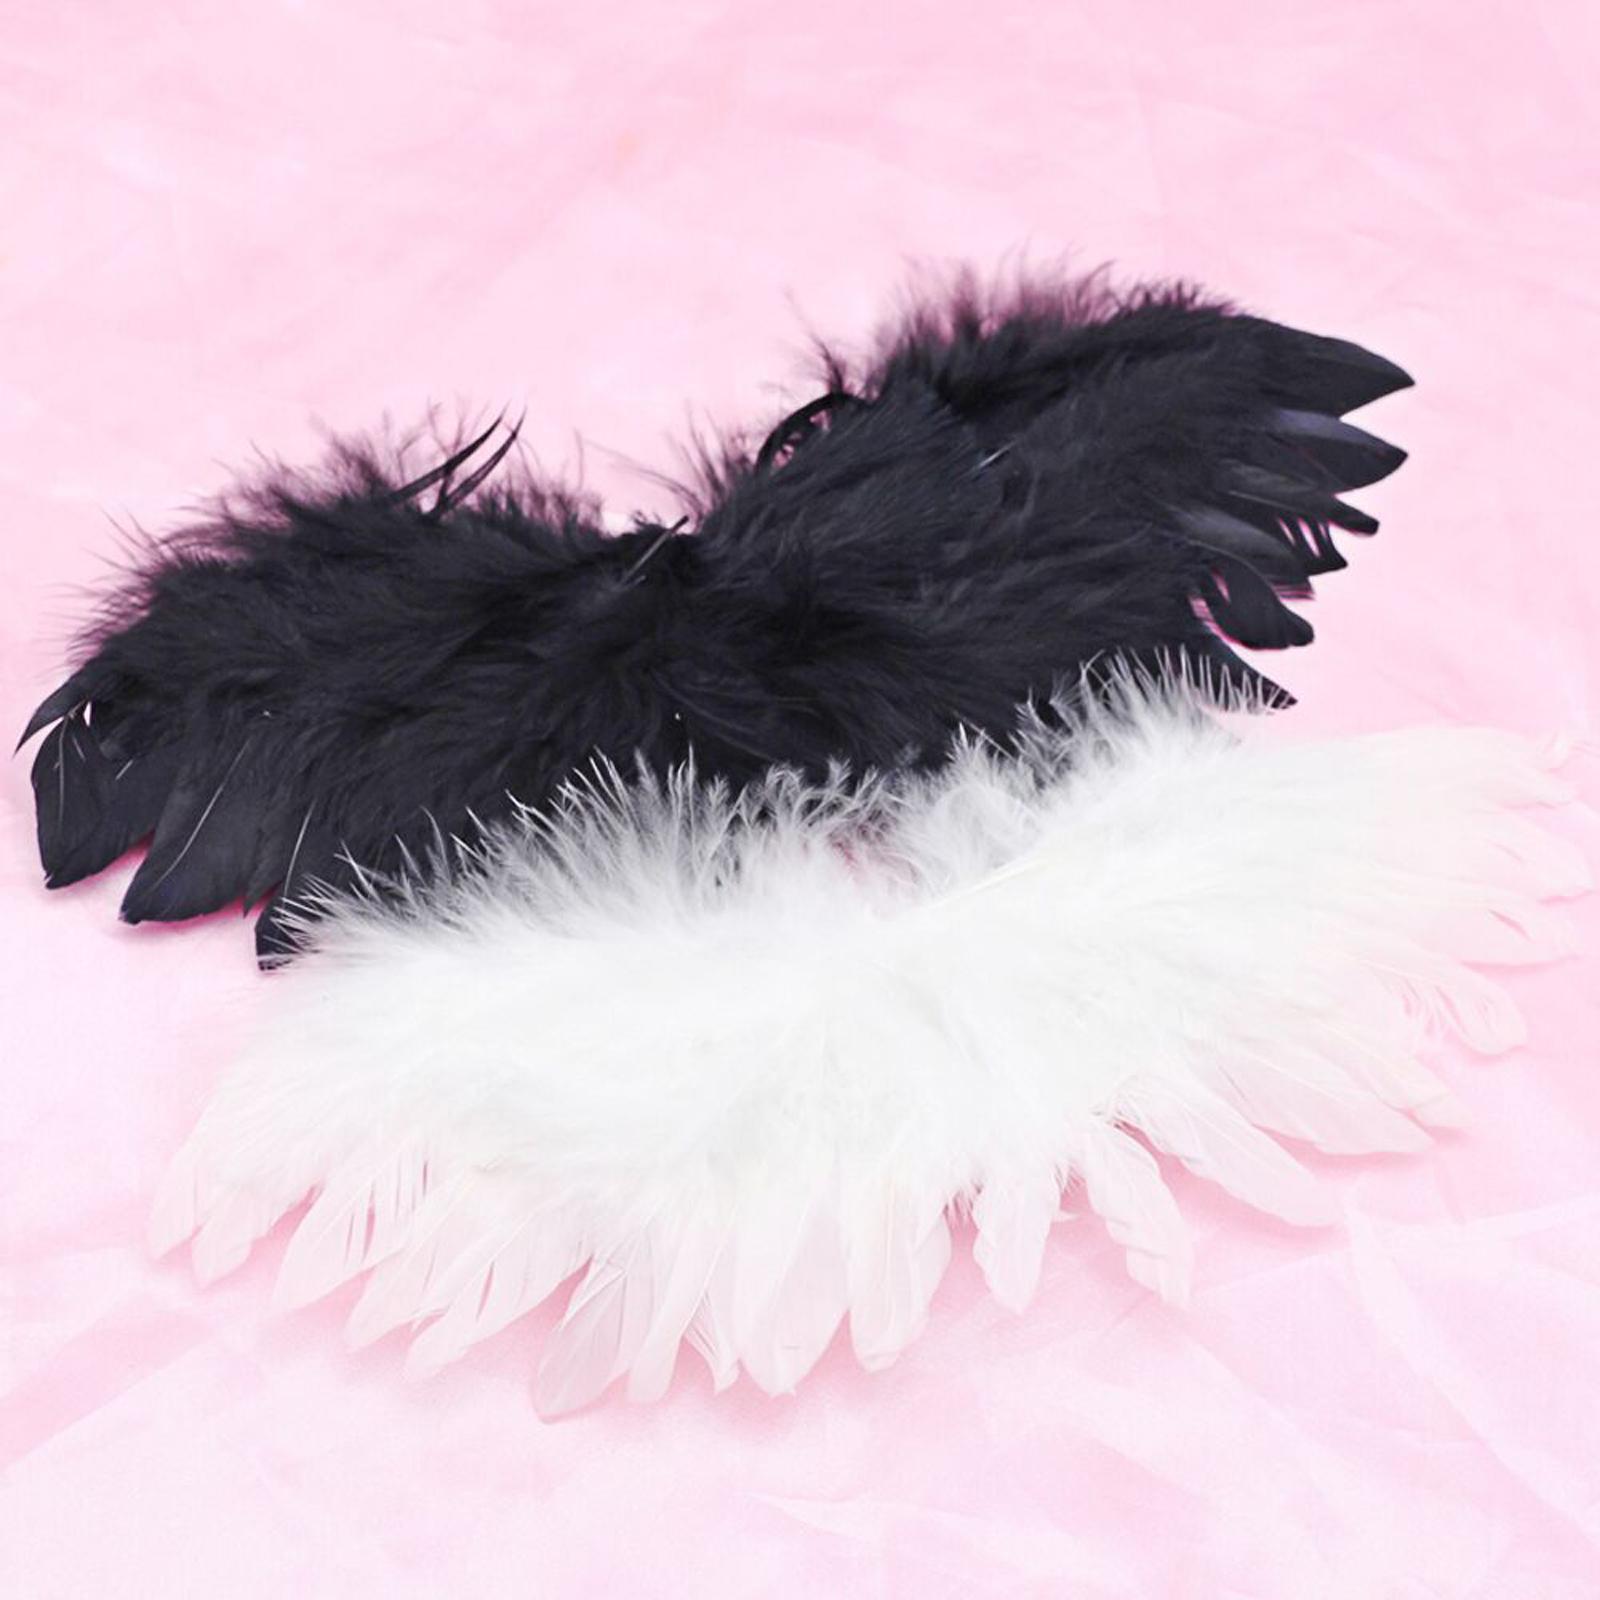 Novelty Wing Costume Accessory Costume Props for Festival Children Kids